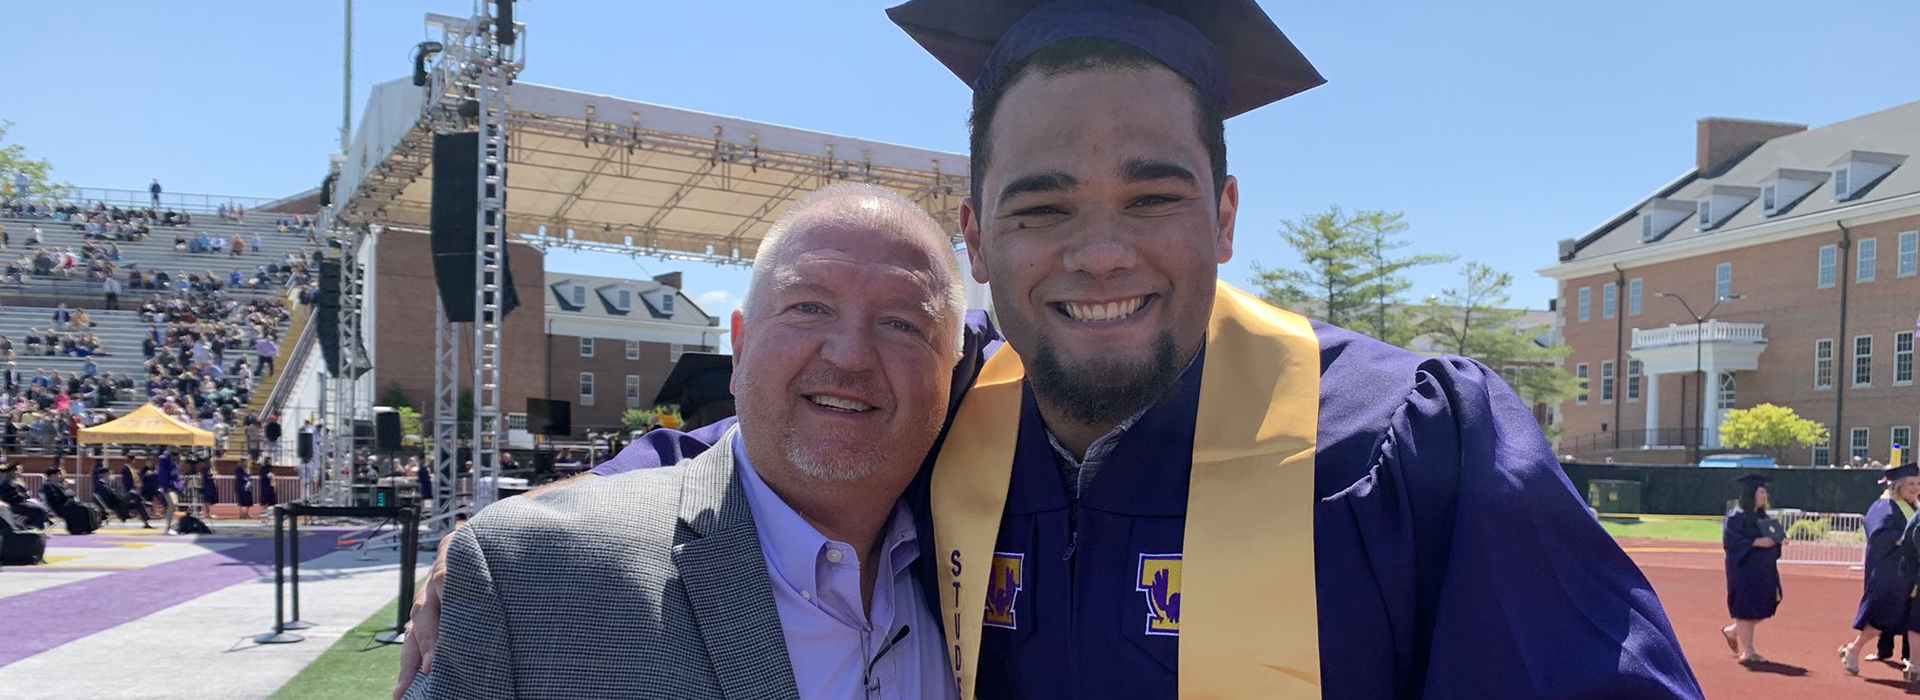 Fifty-two student-athletes and support staff earn degrees from Tech in Spring 2021